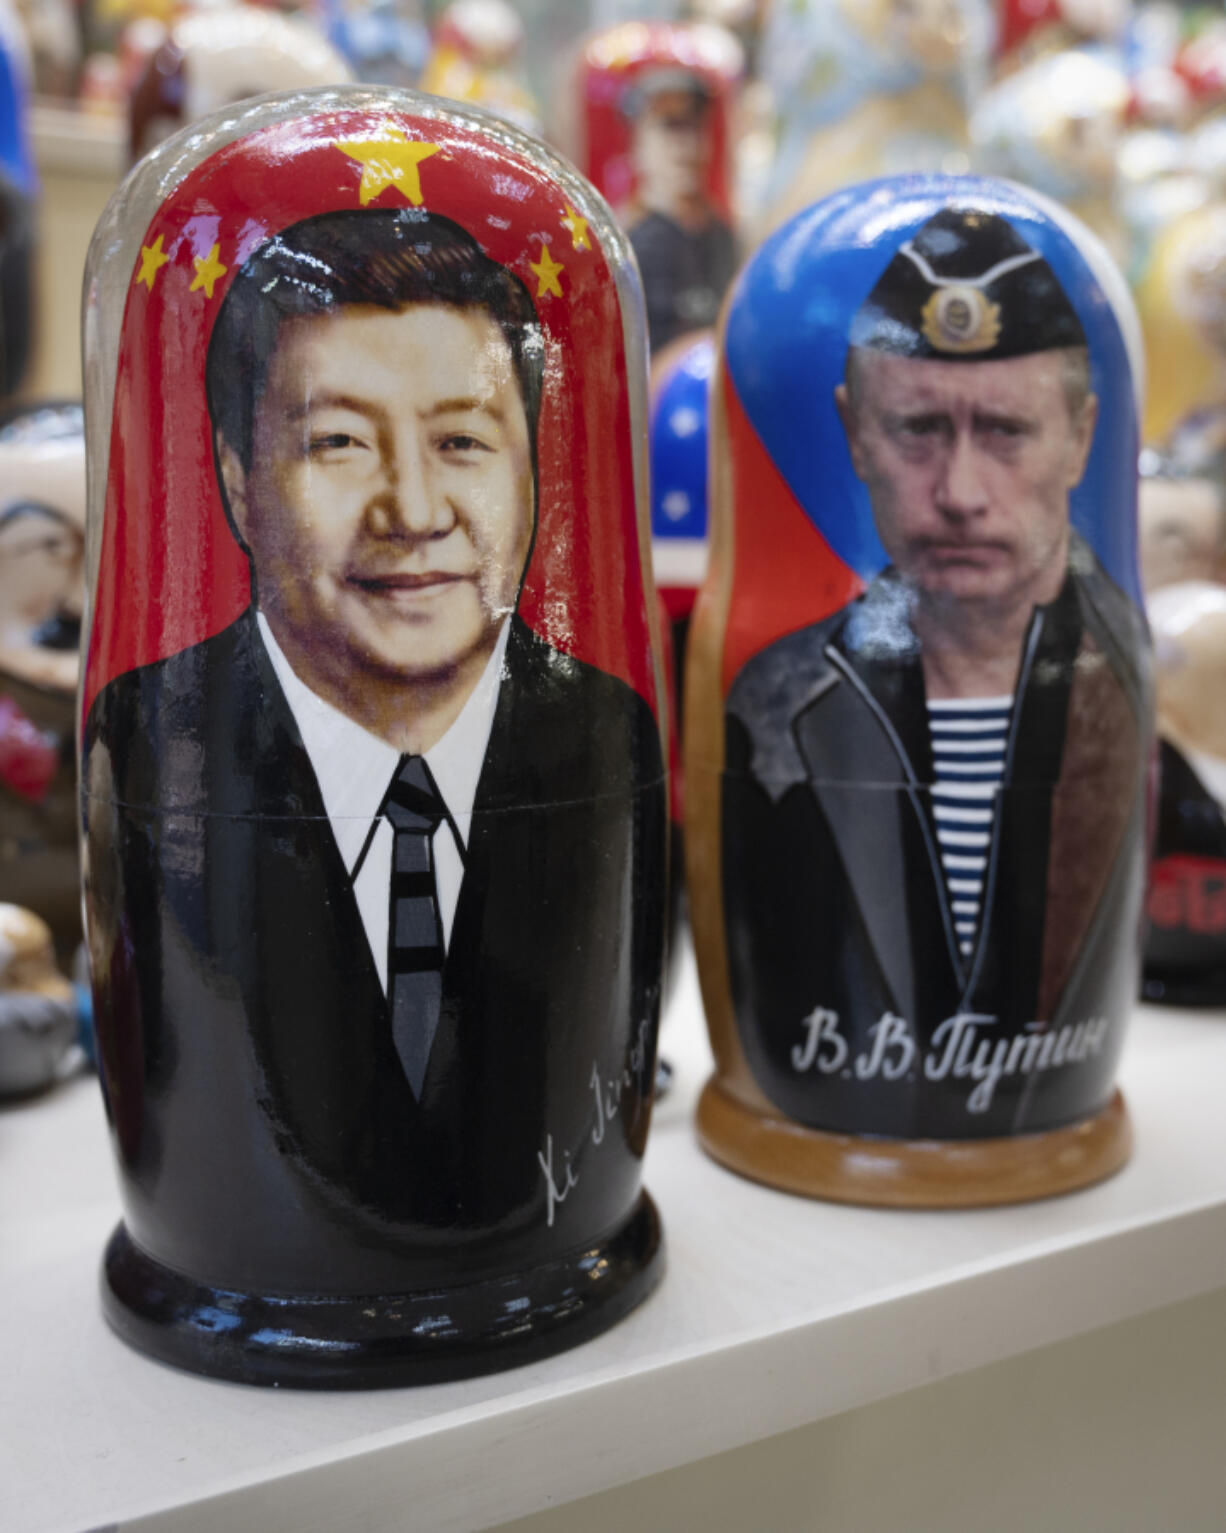 Russian matryoshka dolls with portraits of the Chinese President Xi Jinping, left, and Russian President Vladimir Putin are displayed among others for sale at a souvenir shop in Moscow, Russia, Tuesday, March 21, 2023. Chinese President Xi Jinping arrived in neighbouring Russia for a three-day trip for the talks with Russian President Vladimir Putin.